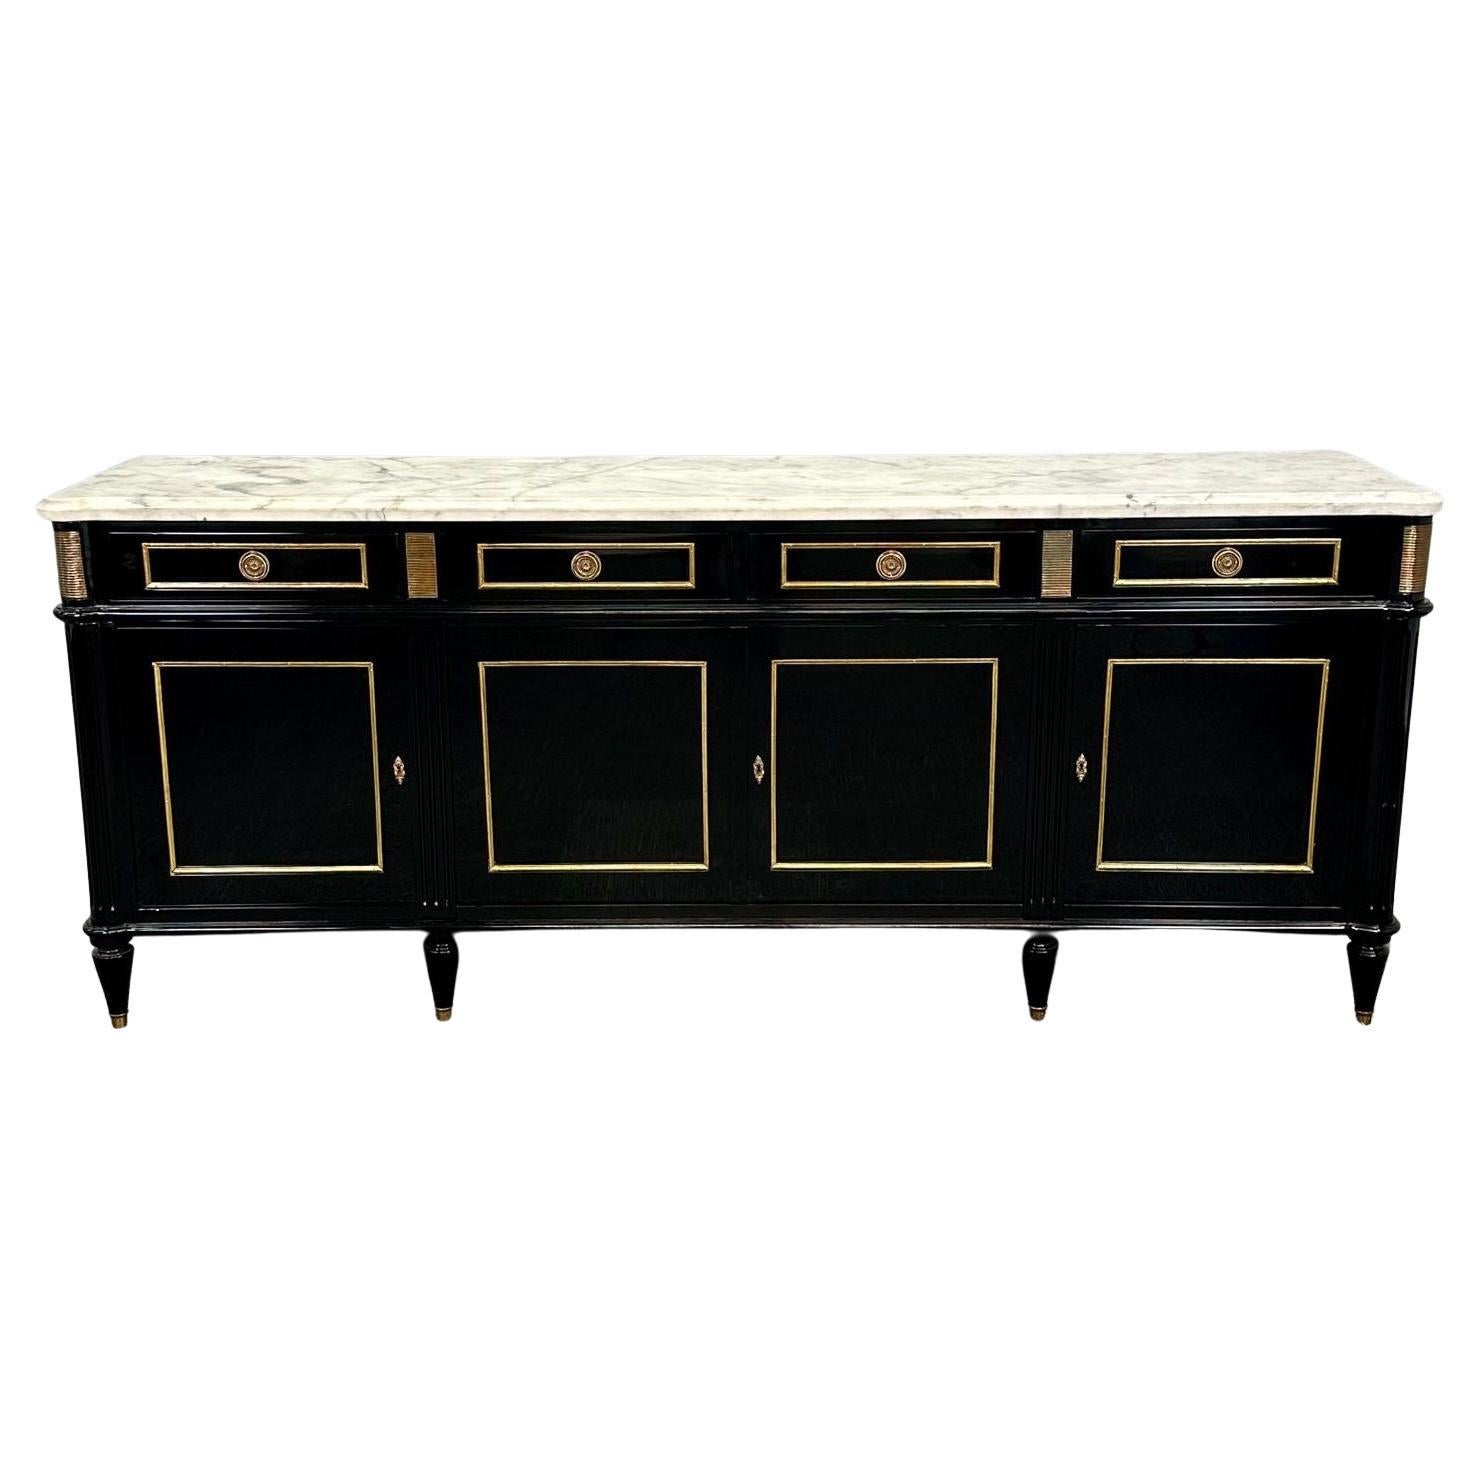 Hollywood Regency Style Black Lacquer Sideboard, Credenza , Maison Jansen Style For Sale